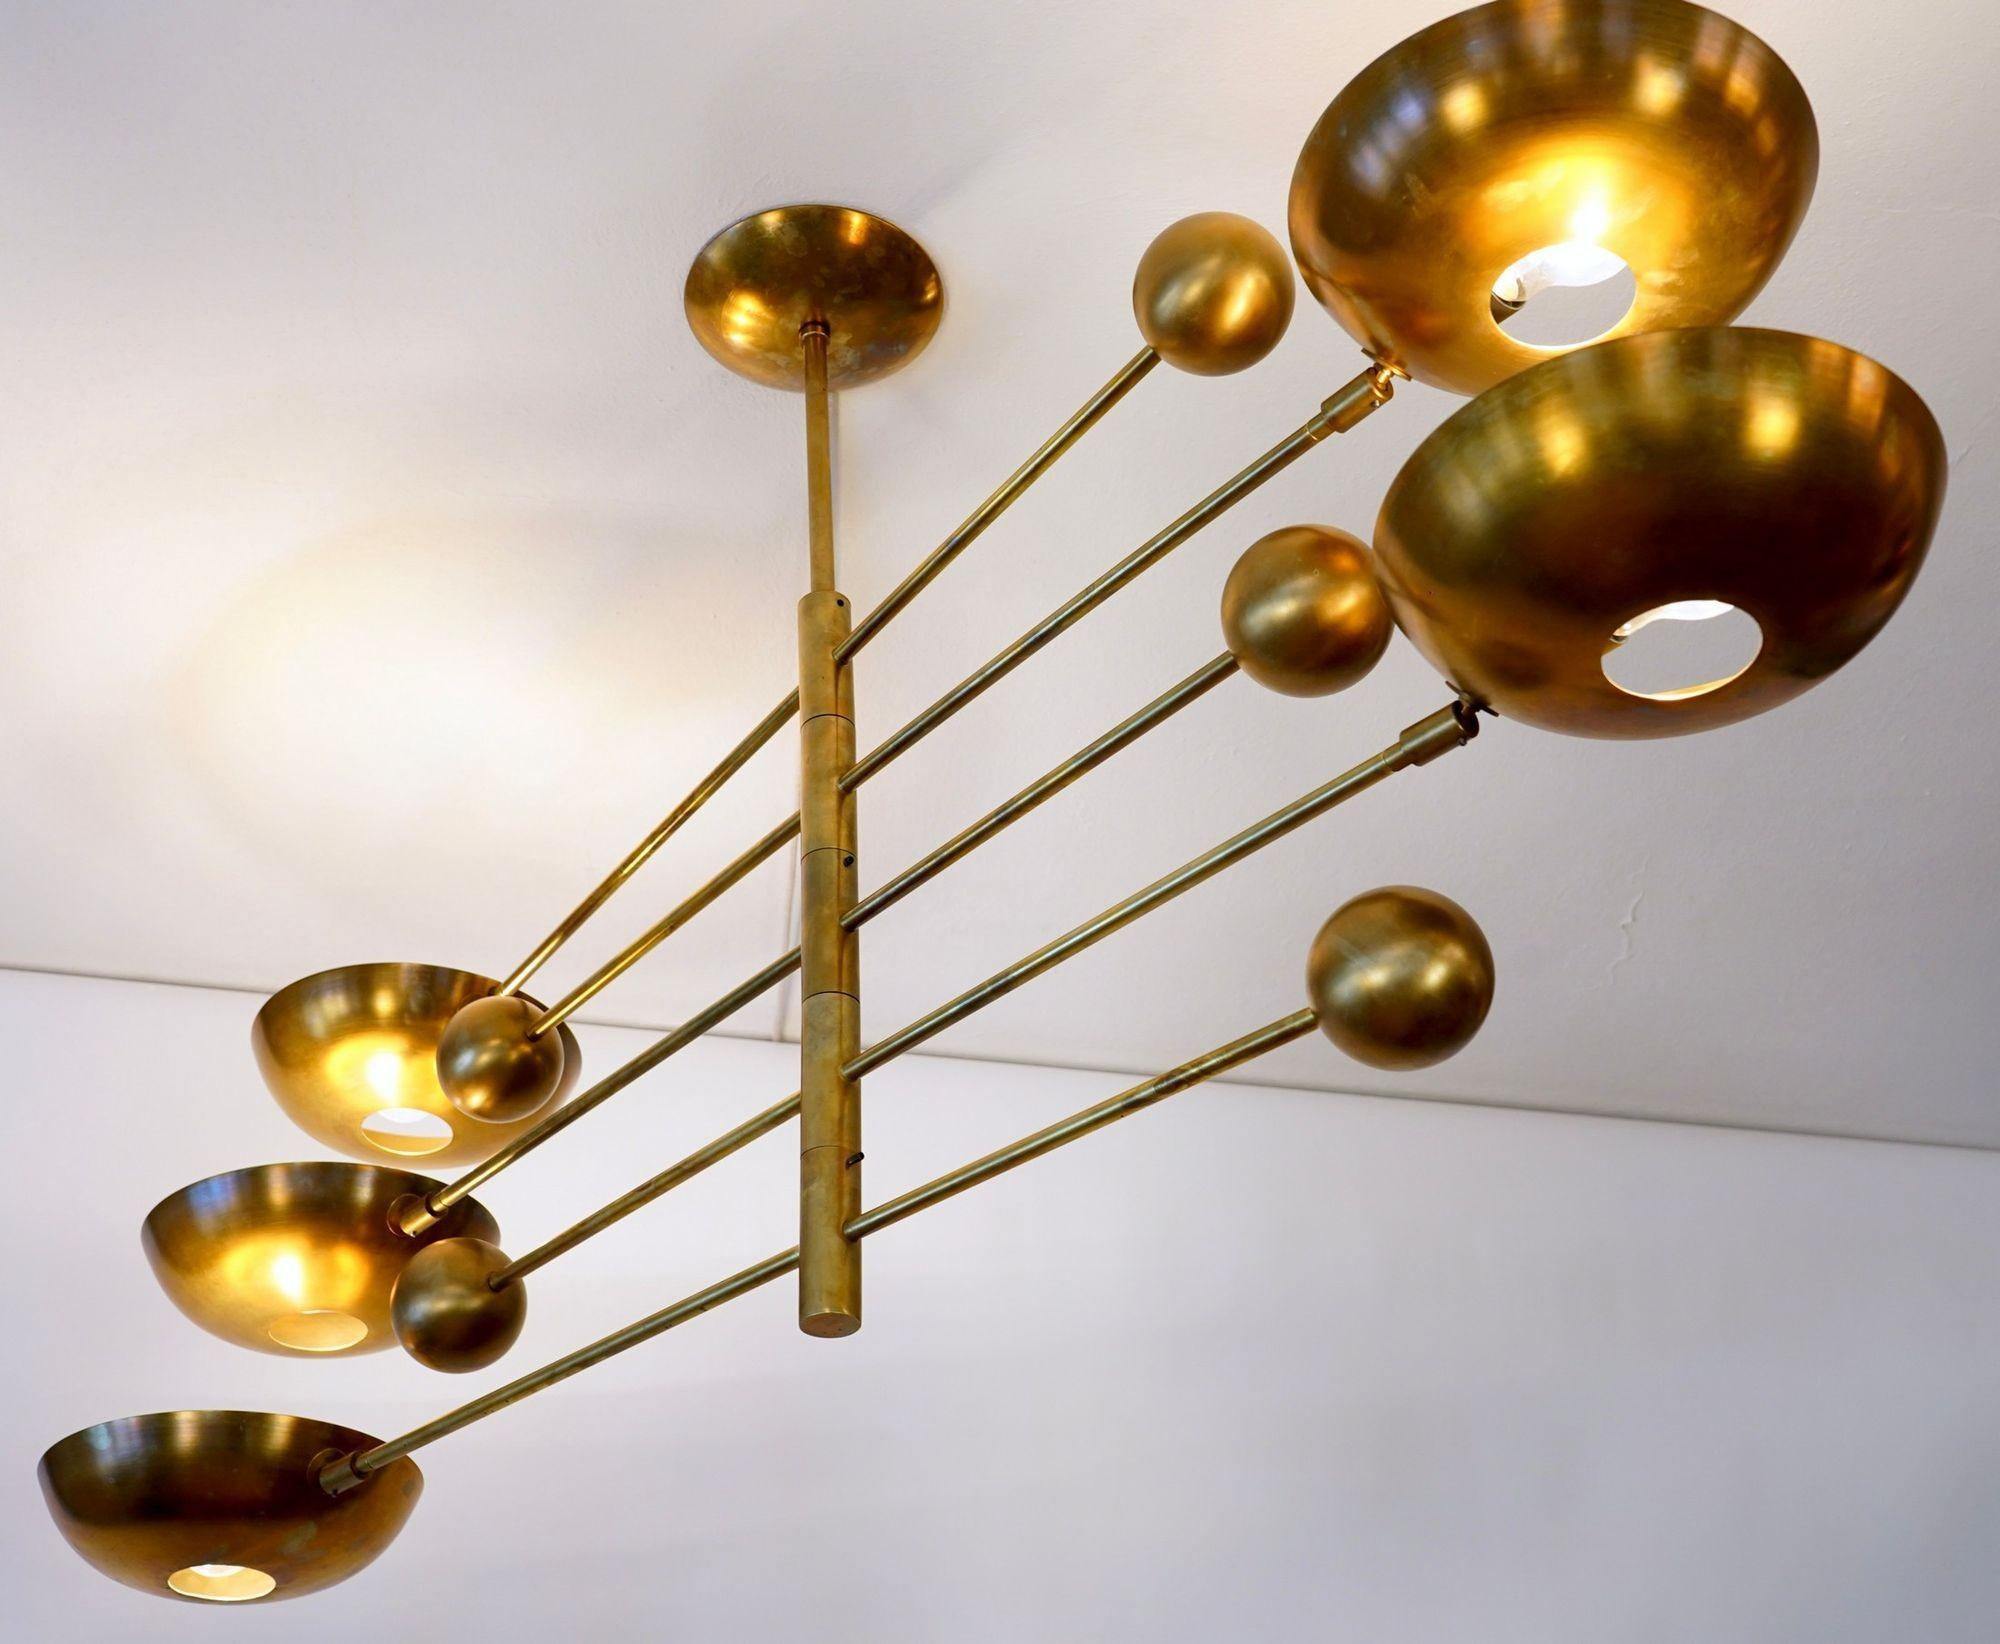 Orbitale Brass Chandelier 5 Rotating Balanced Arms, All Brass and Natural Patina For Sale 7